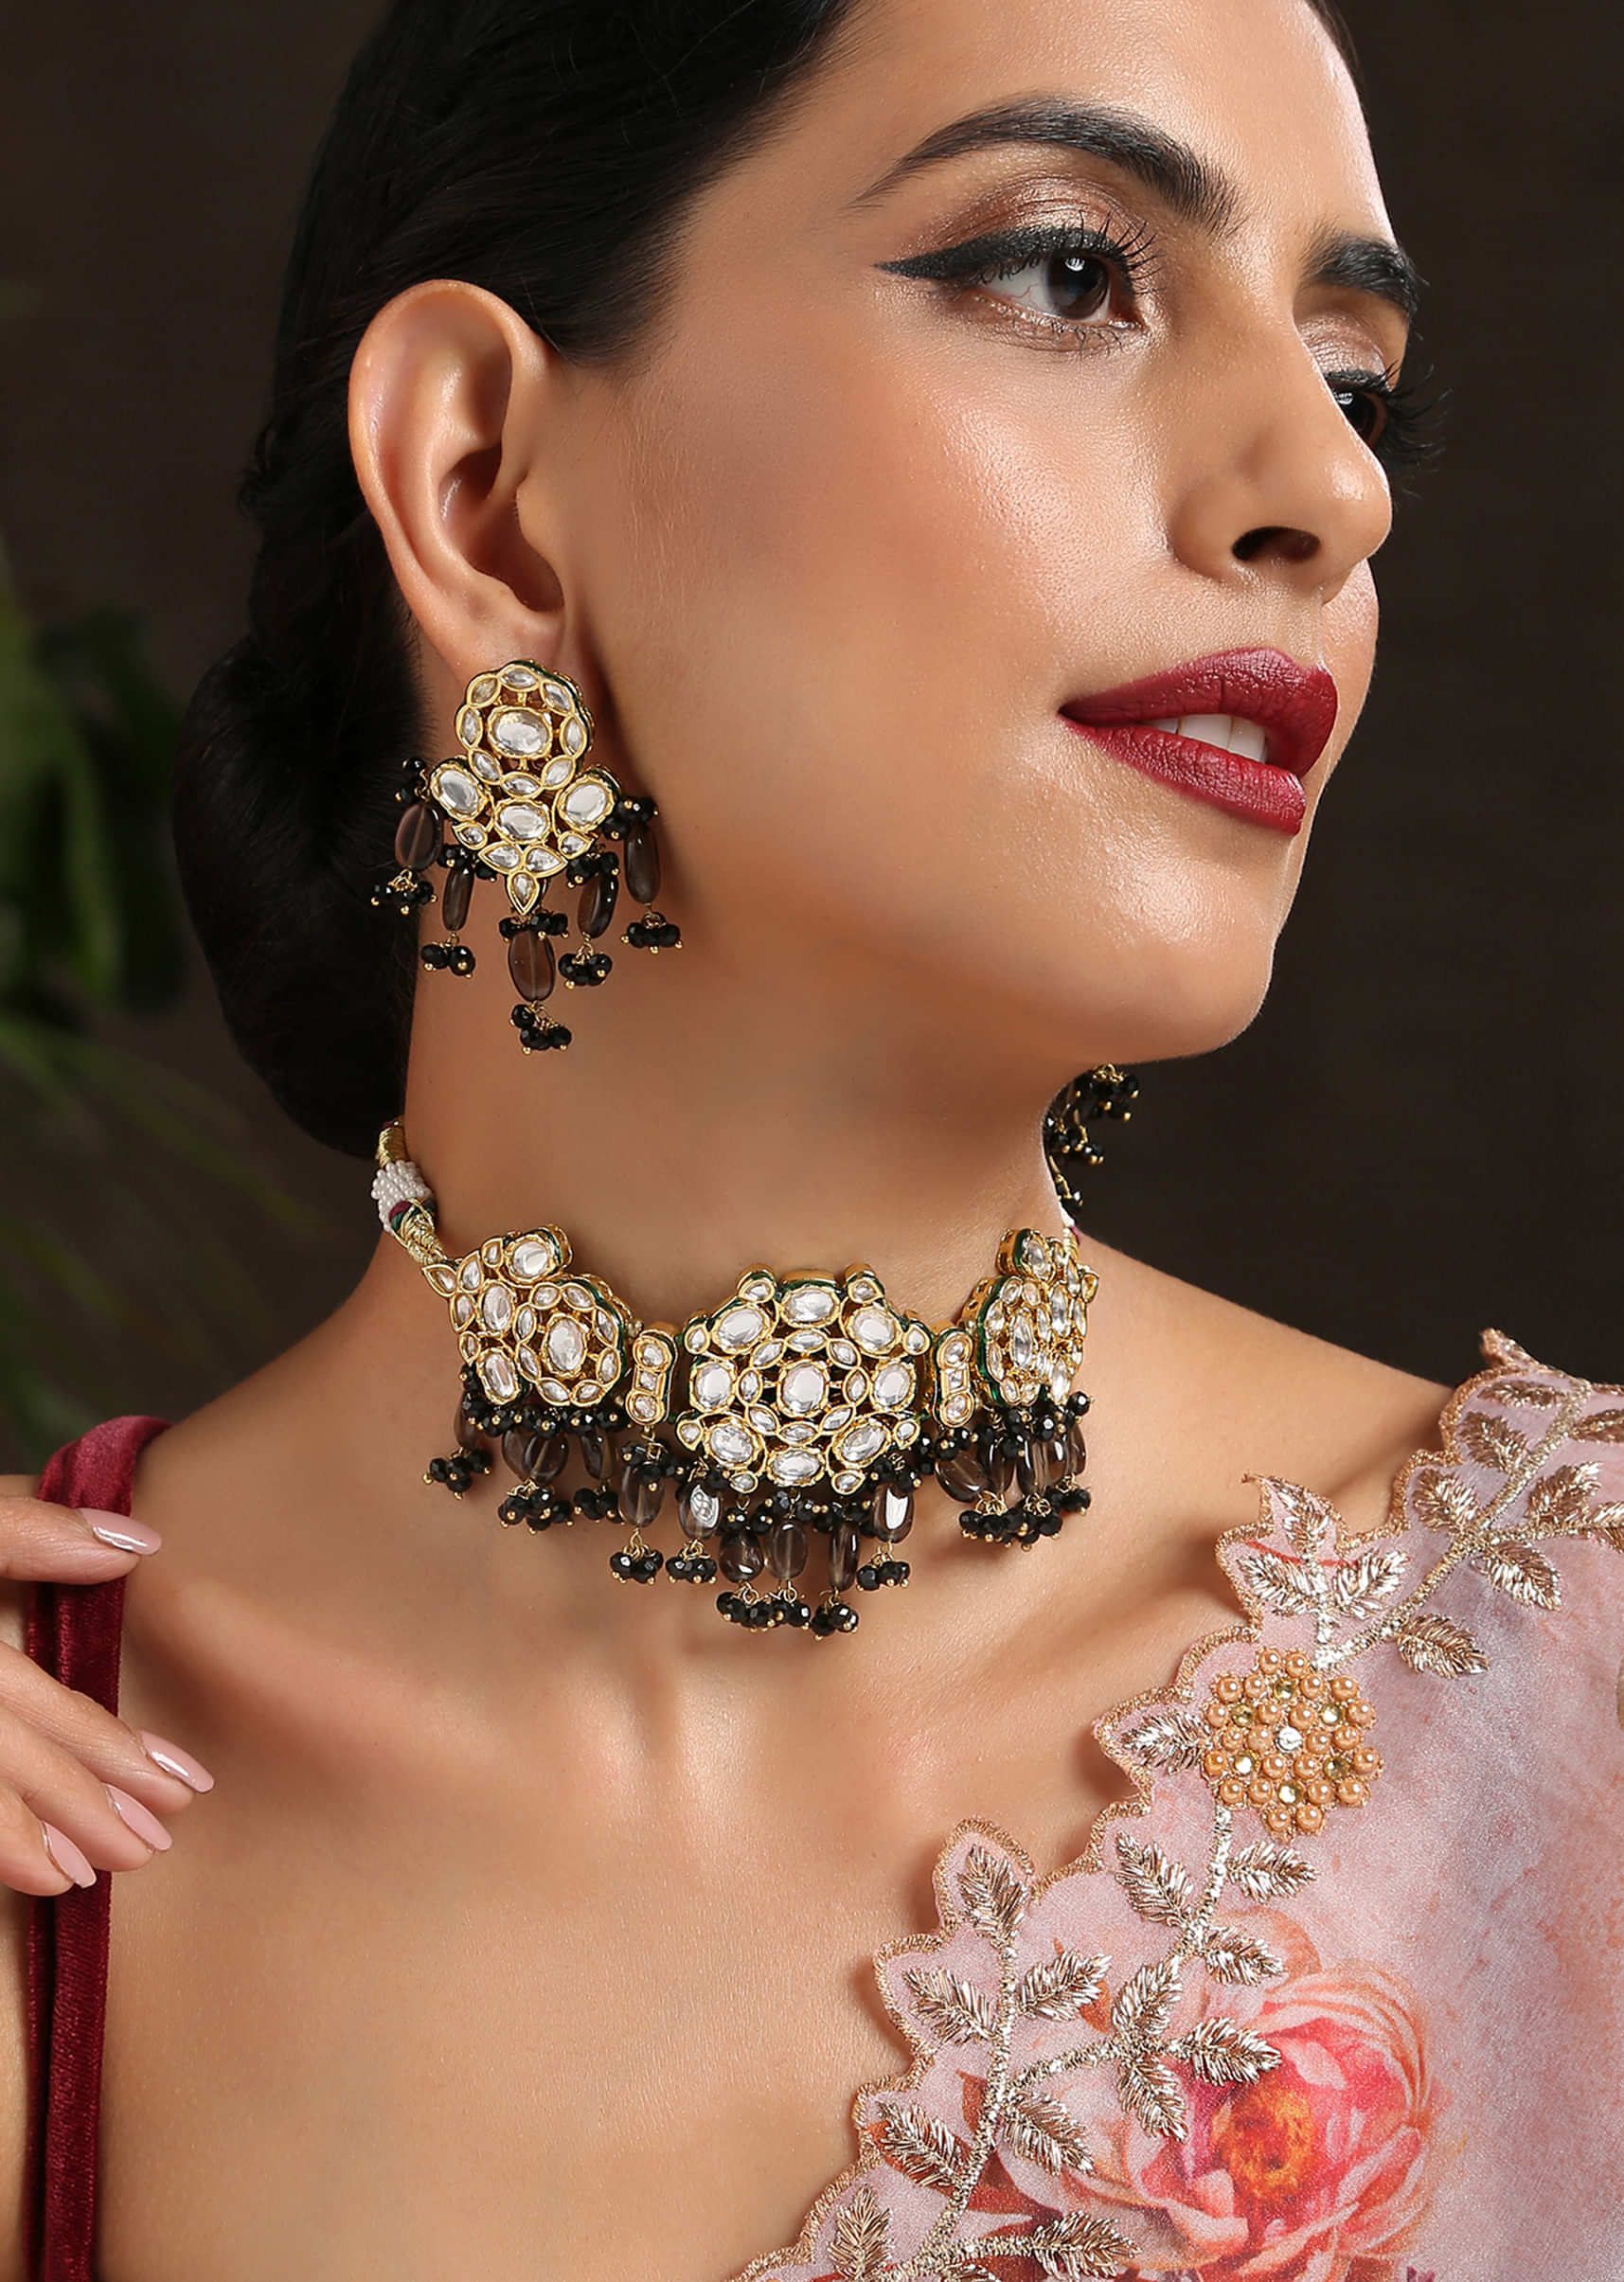 Gold Kundan Choker And Earrings Set With Dangling Stones In Black And Brown By Paisley Pop